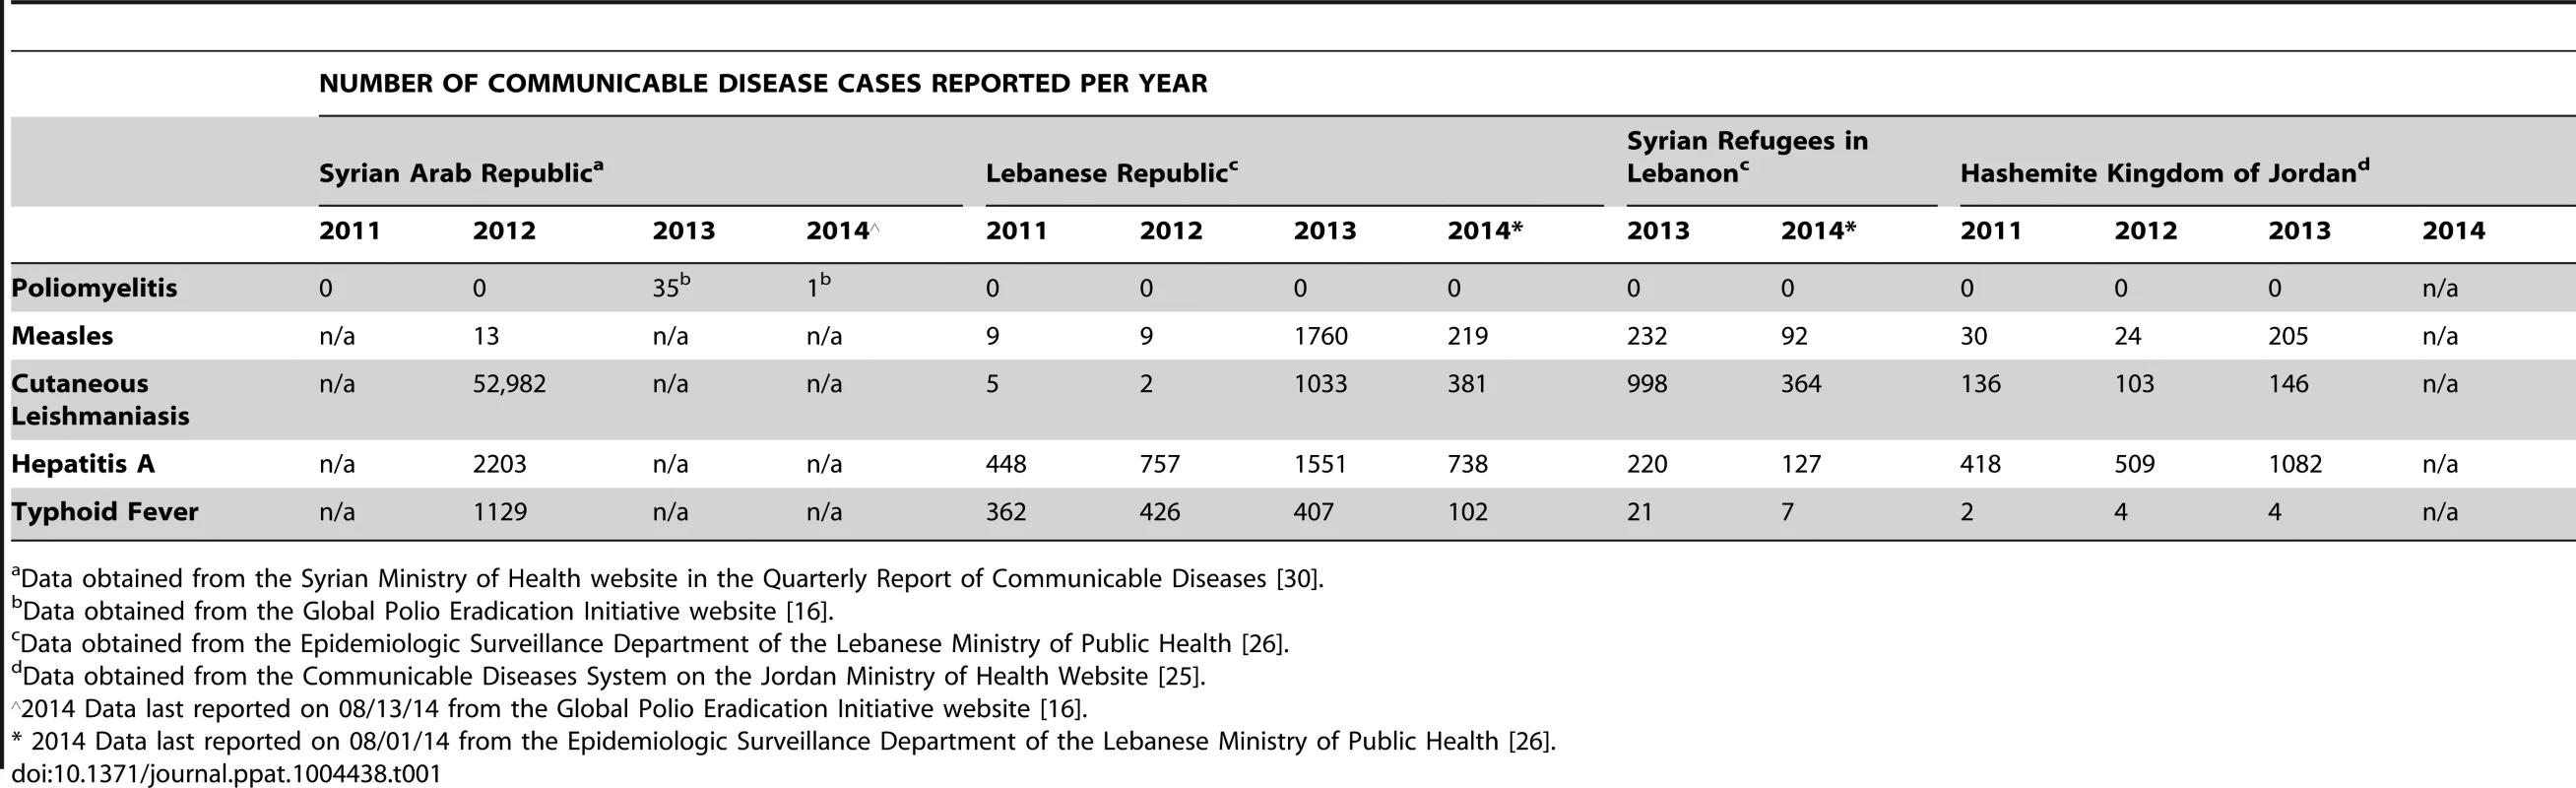 Reported cases of communicable diseases per year between 2011 and 2014 in Syria, Lebanon, and Jordan.